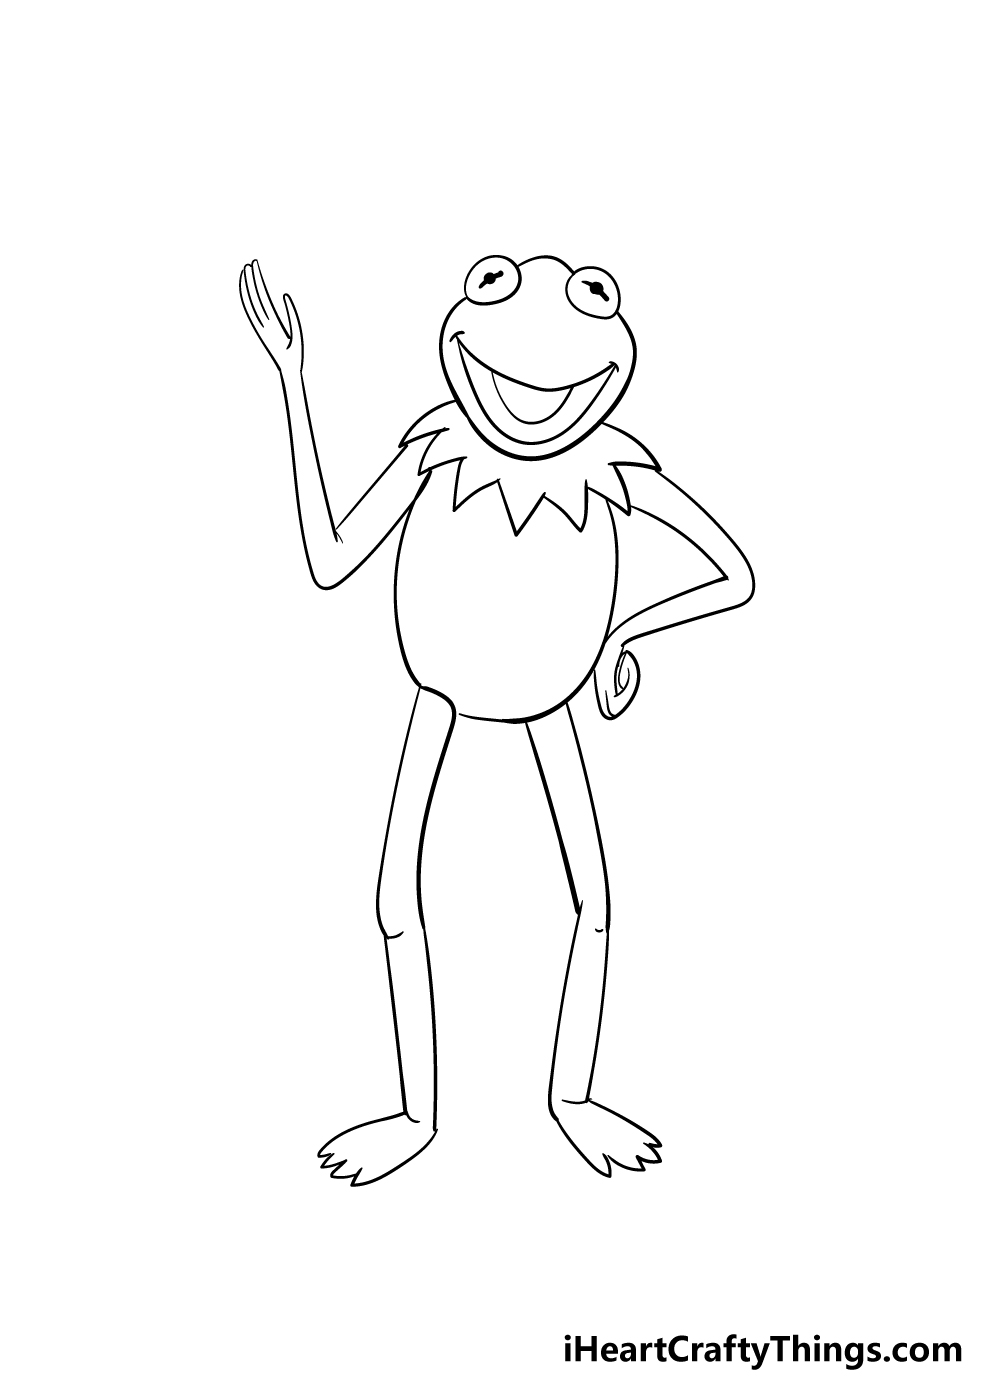 drawing Kermit the frog step 7